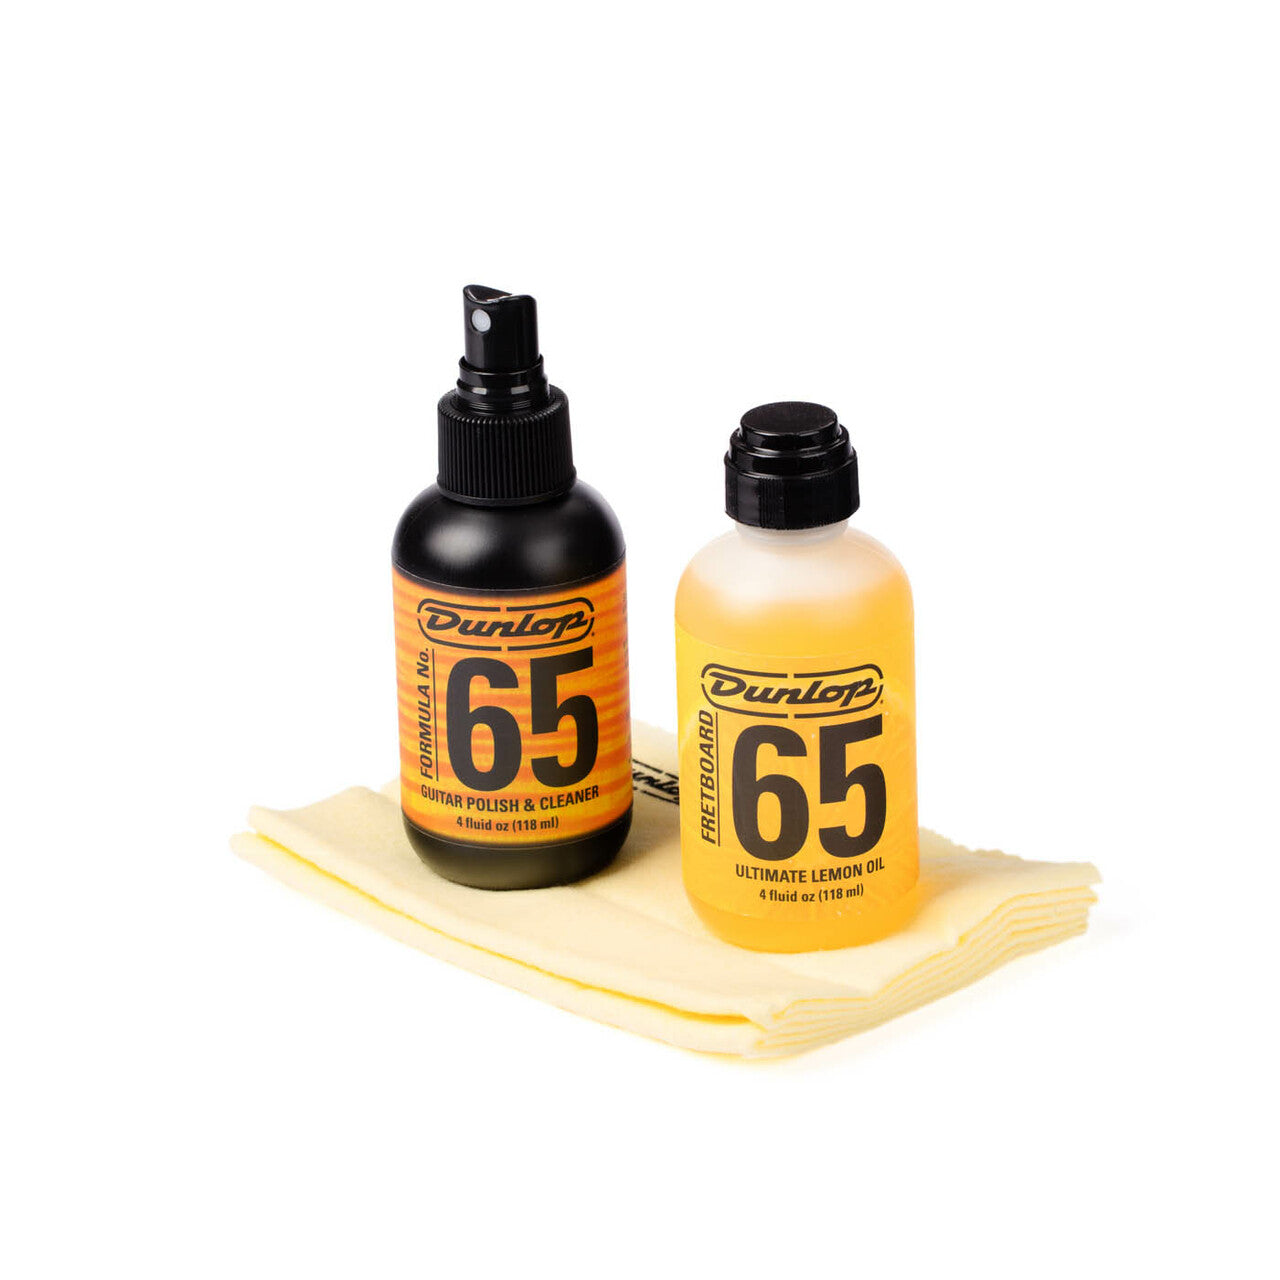 SYSTEM 65 BODY AND FINGERBOARD CLEANING KIT